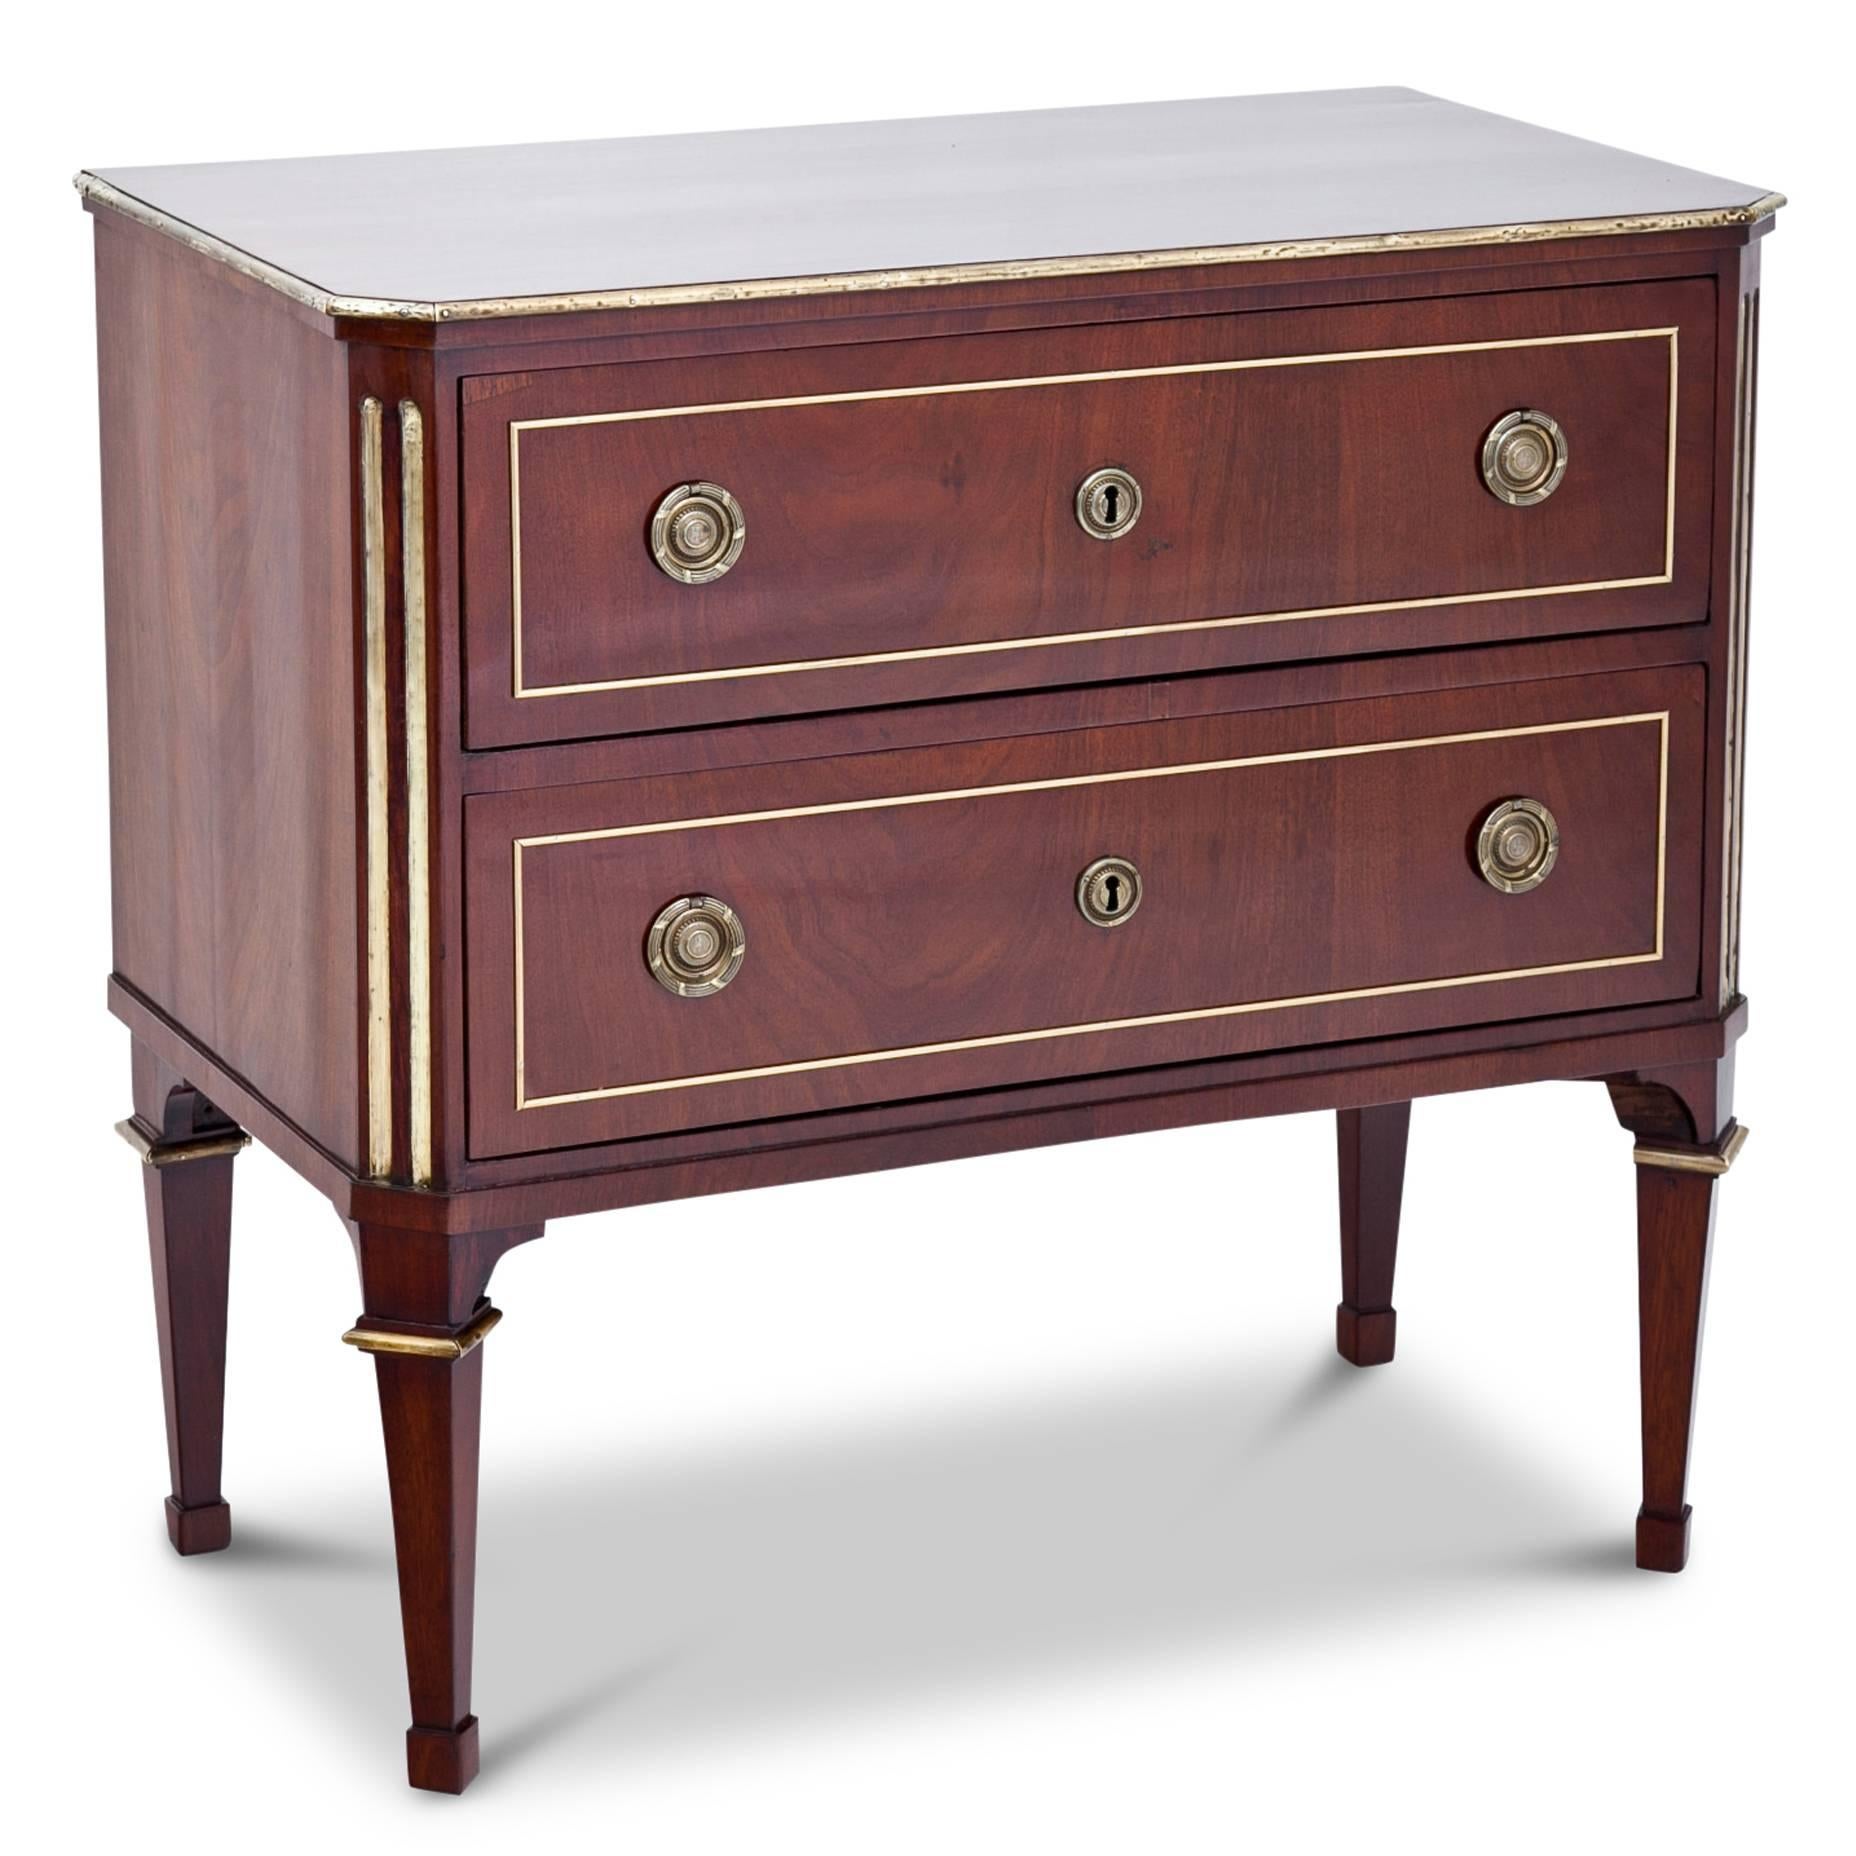 Neoclassical Mahogany Chest of Drawers, France, First Half of the 19th Century (19. Jahrhundert)